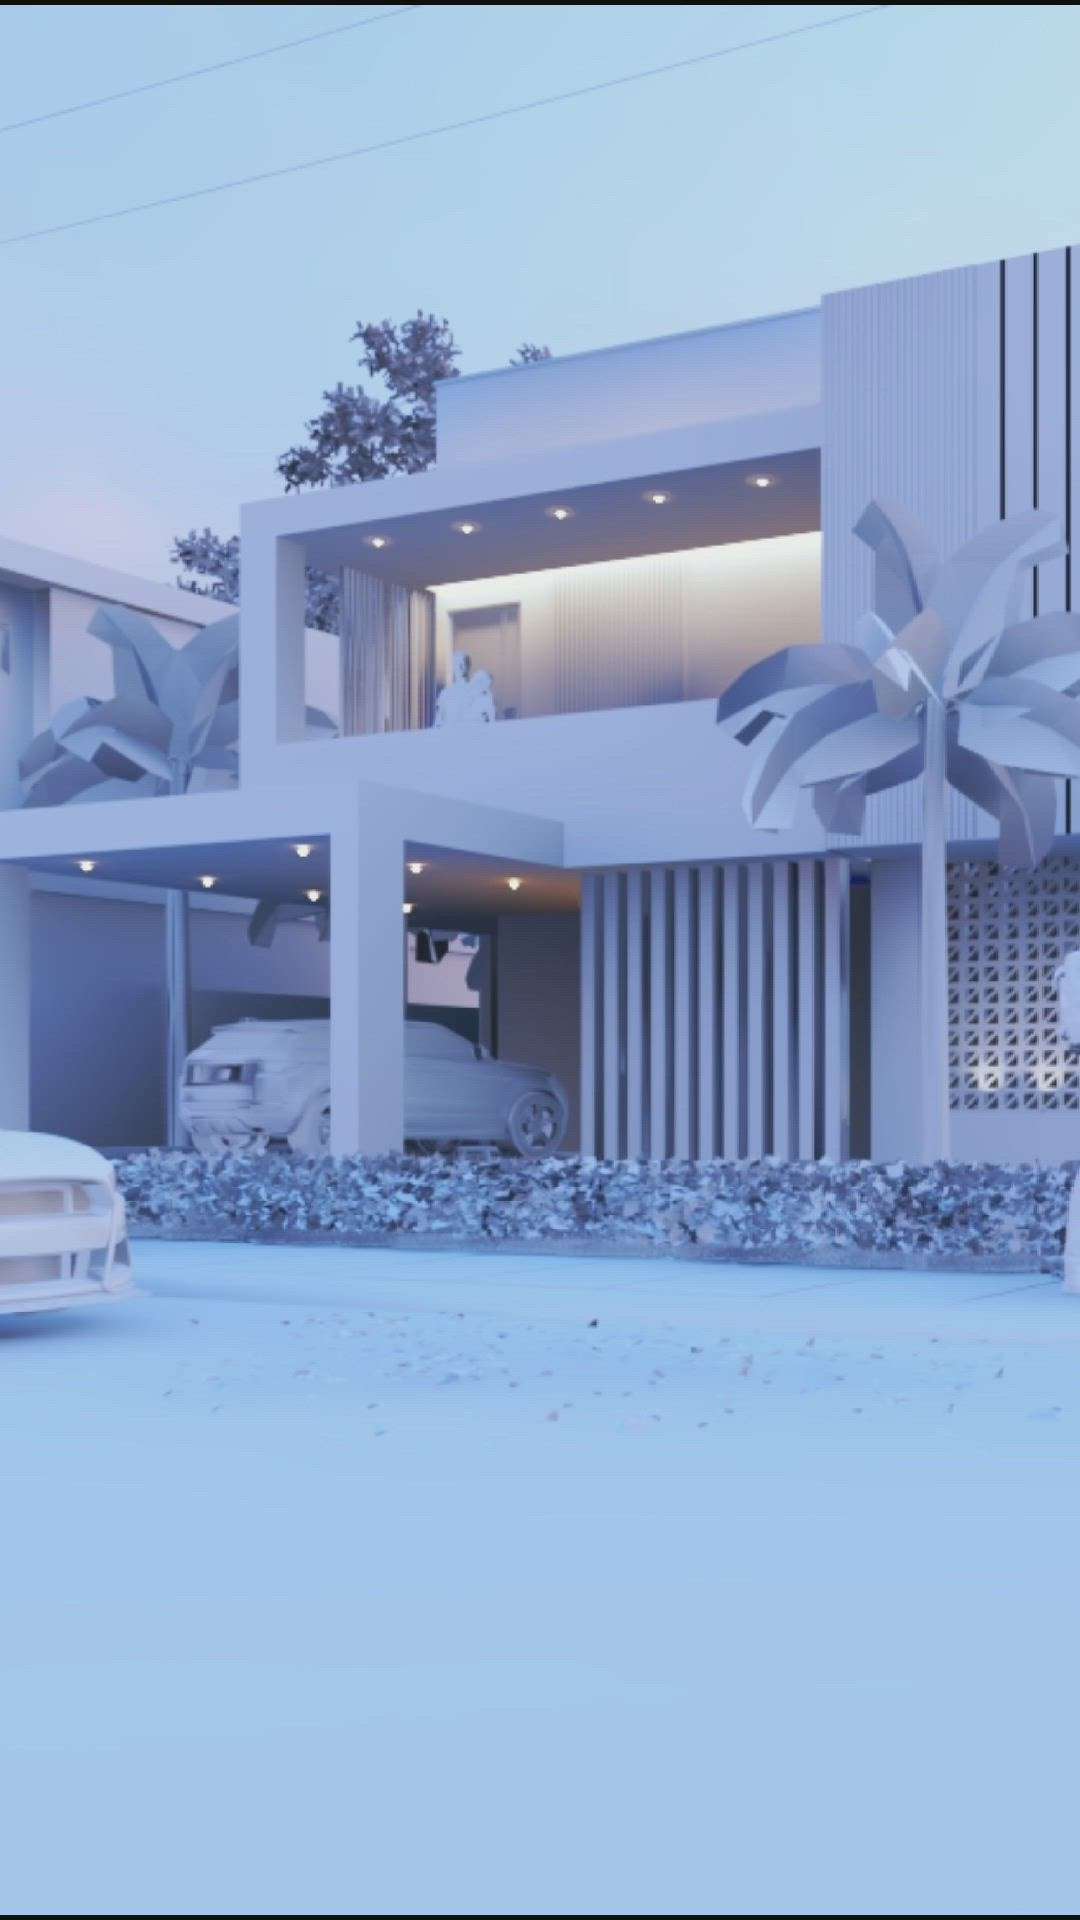 Modern House Design

>follow us for more daily dose of 3D
> For more enquiry Dm @d2linteriorforspace 

#3d #modeling #3dmodel #arquitetura #arquiteturadeinteriores #exterior_Work #exteriordesigns #reach #HouseDesigns #sketchupvray